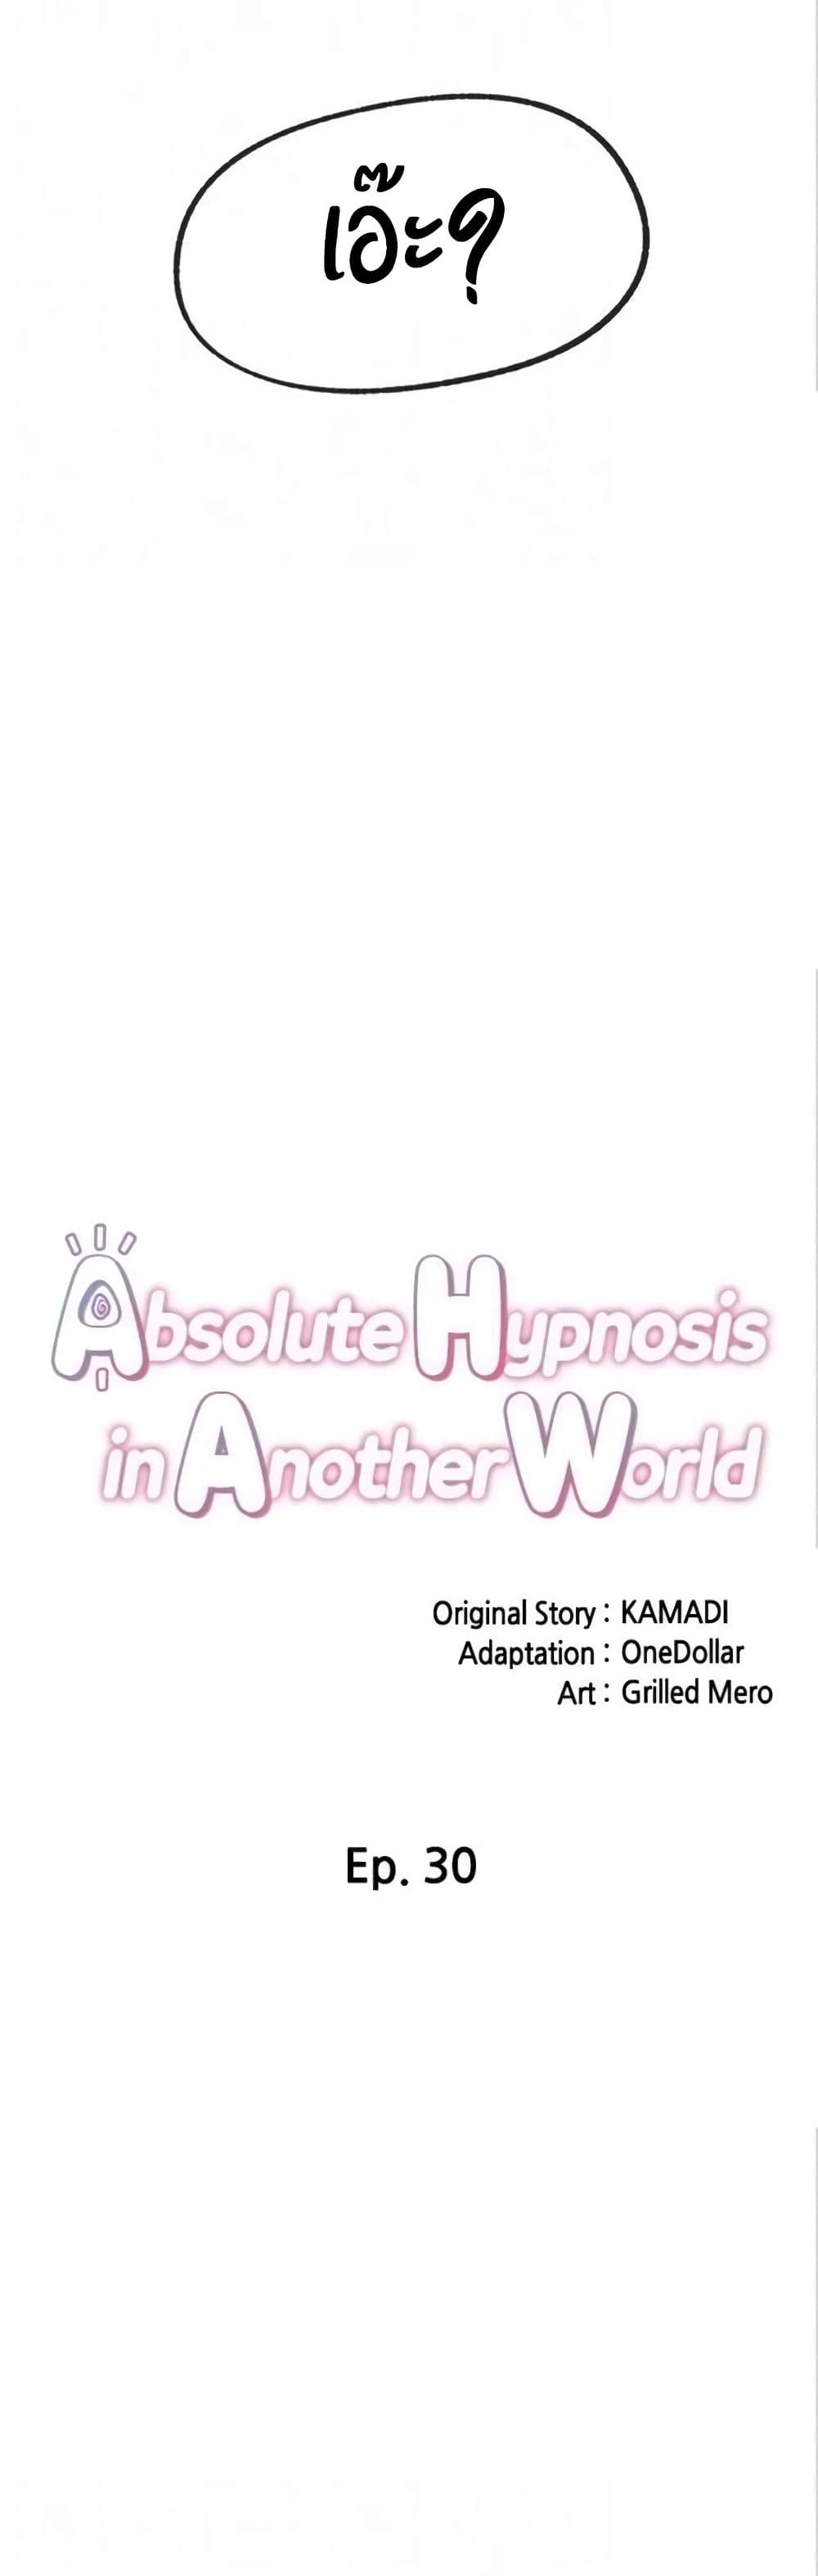 Absolute Hypnosis in Another World 30 (7)